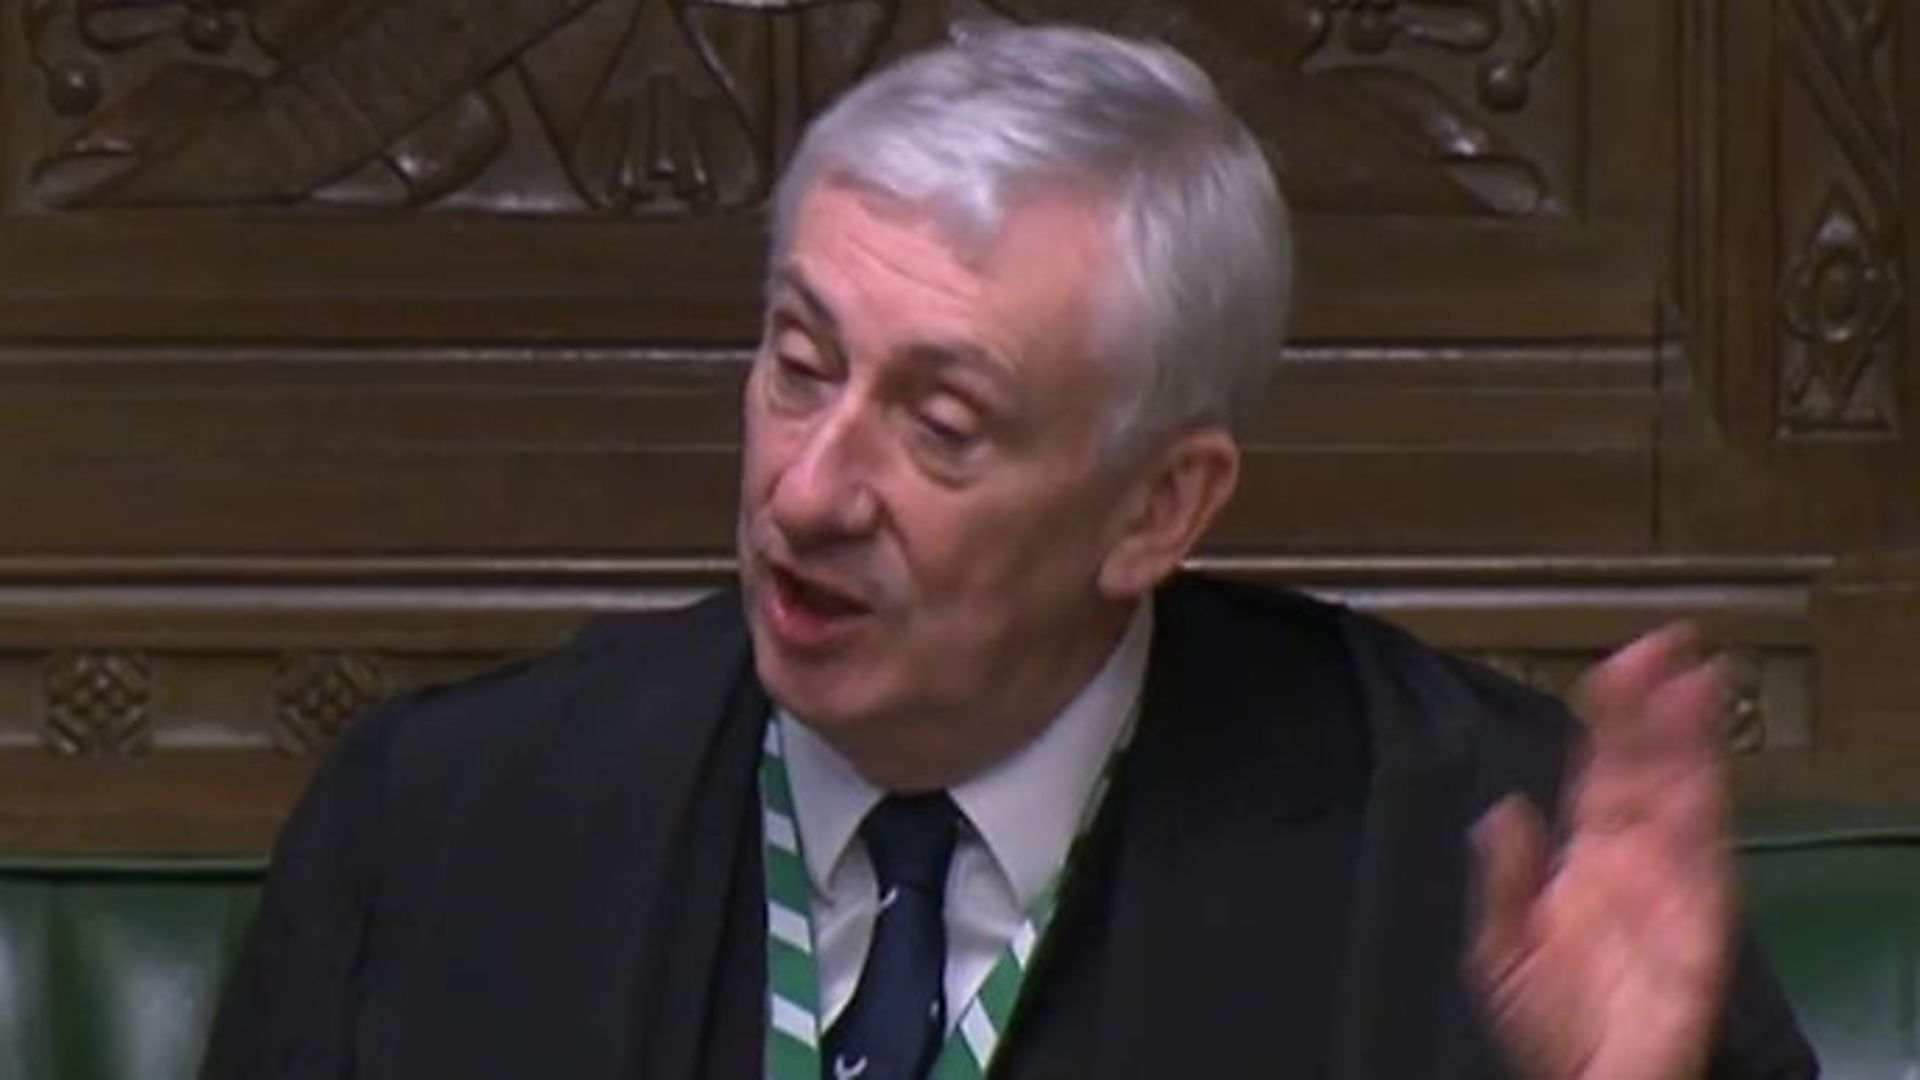 Sir Lindsay Hoyle (pictured above) in the House of Commons - Credit: Parliamentlive.tv